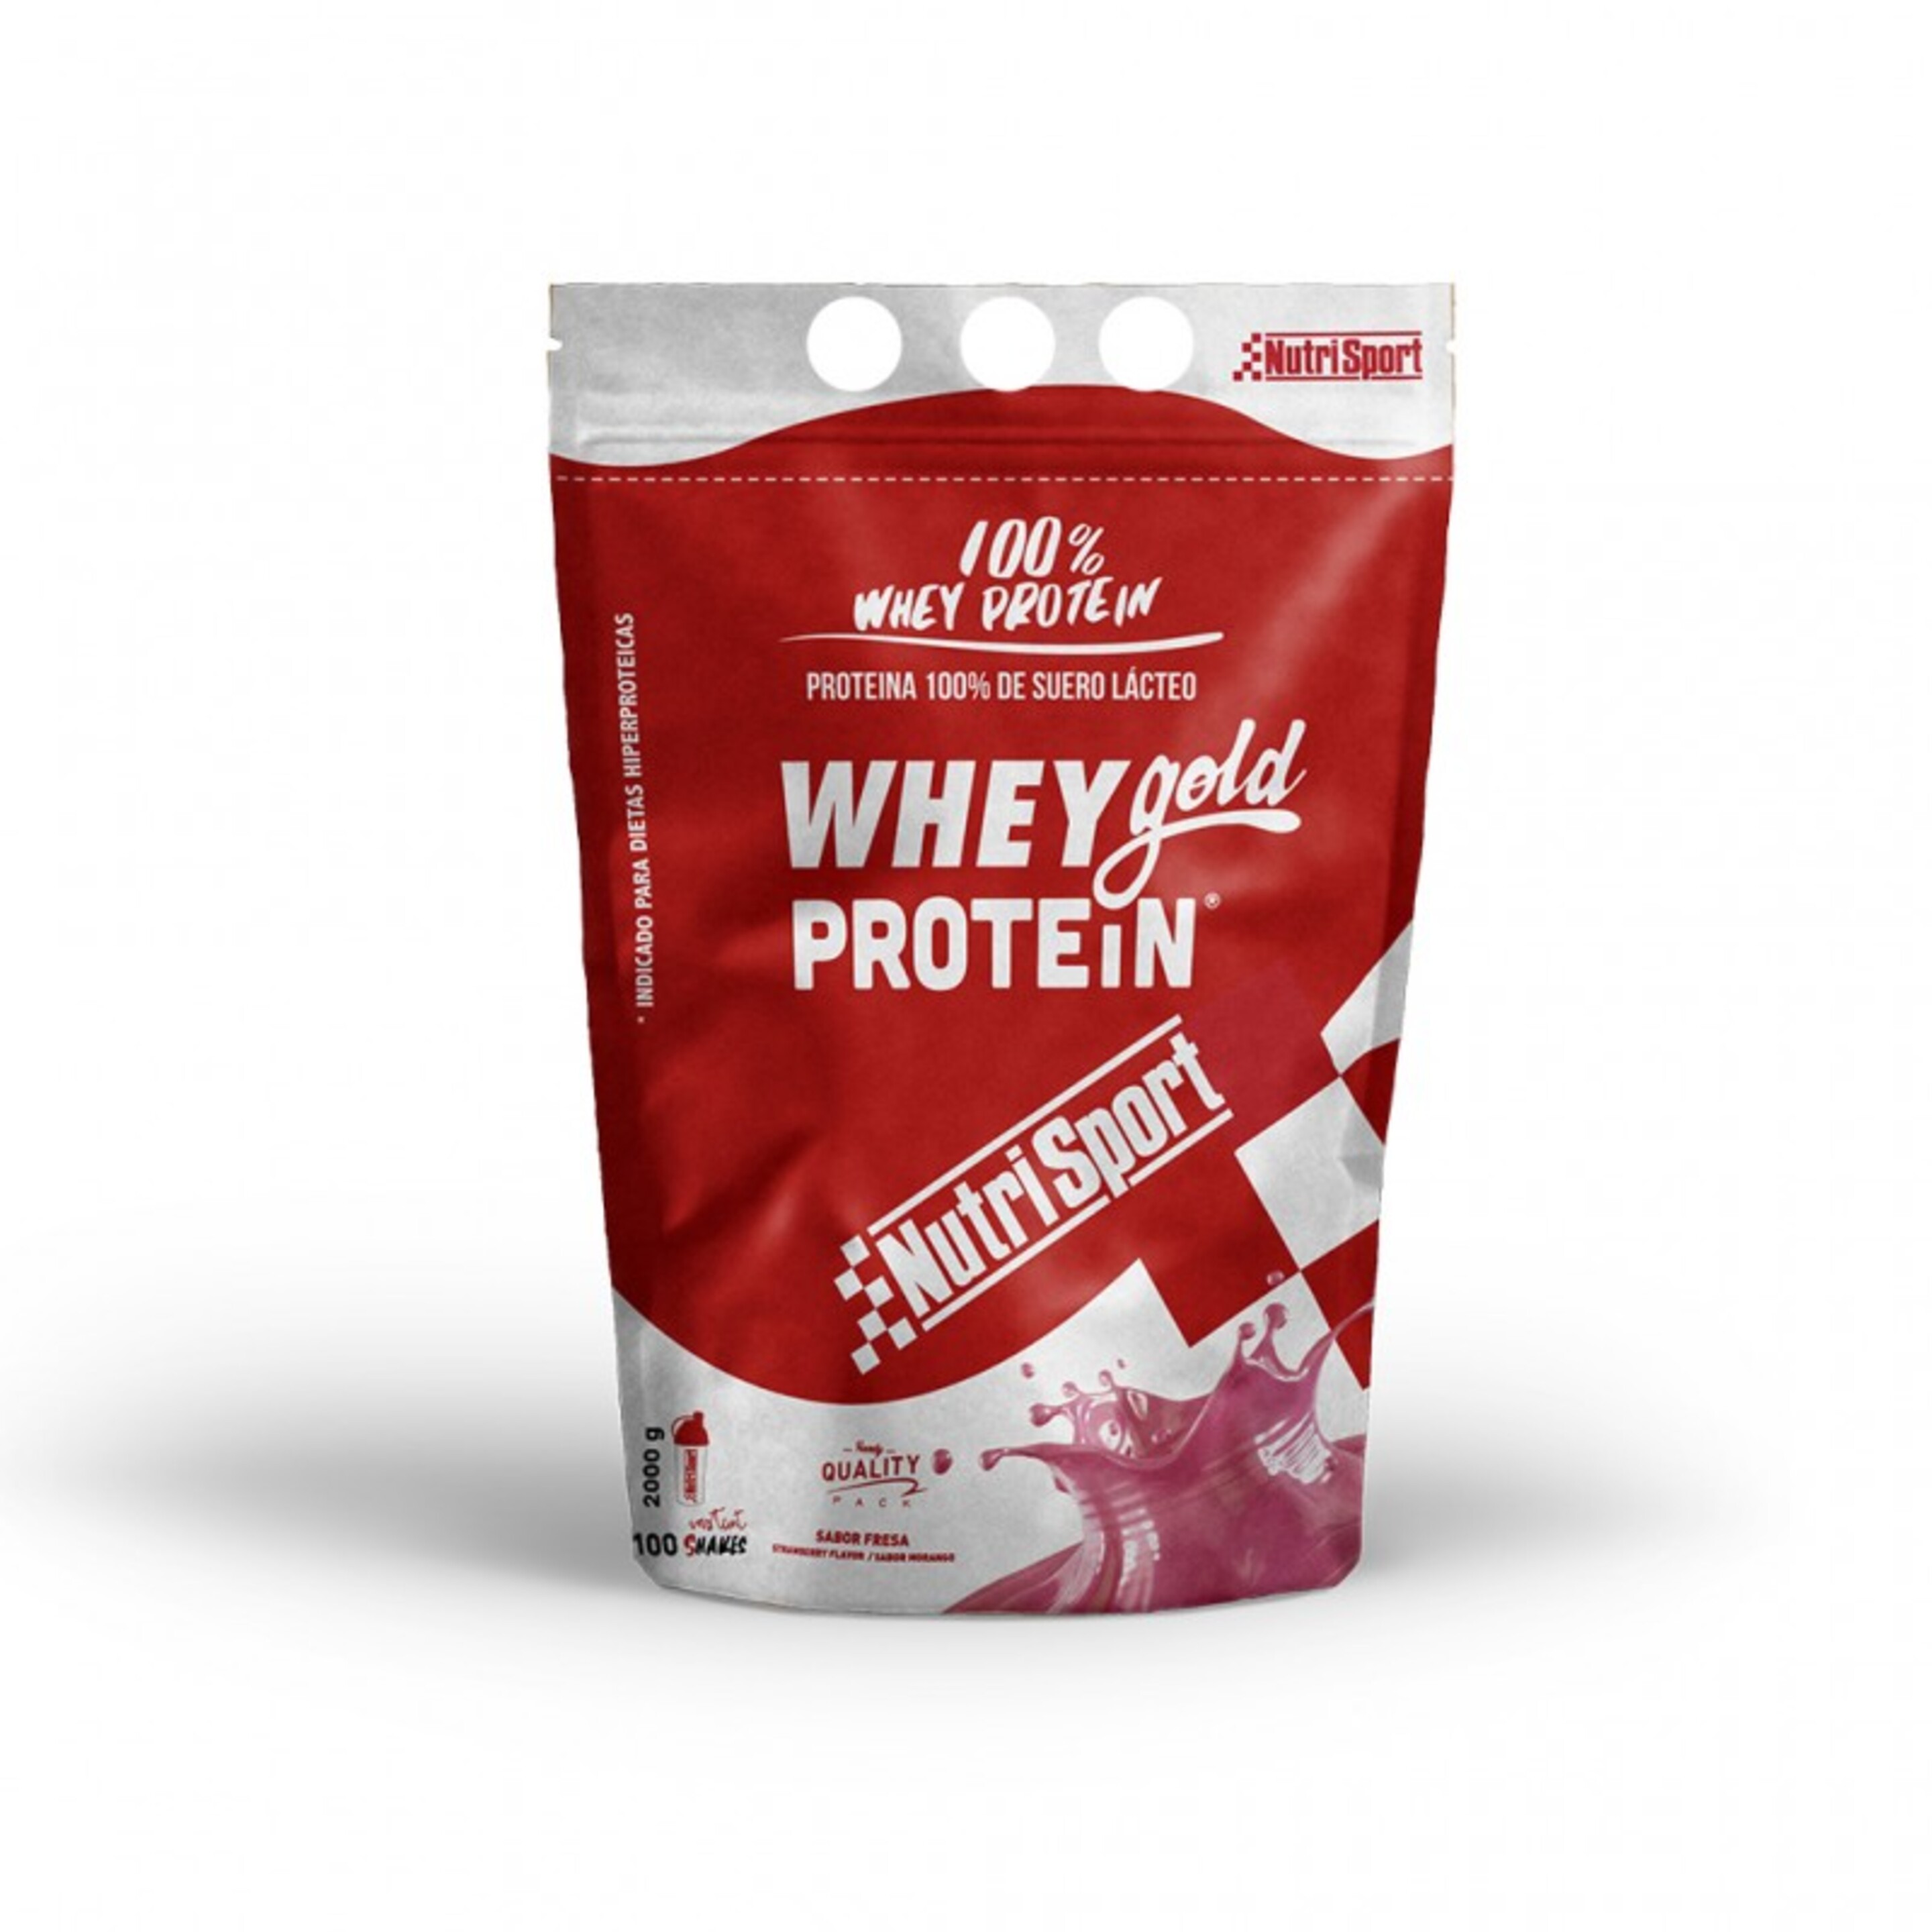 Whey Gold Protein